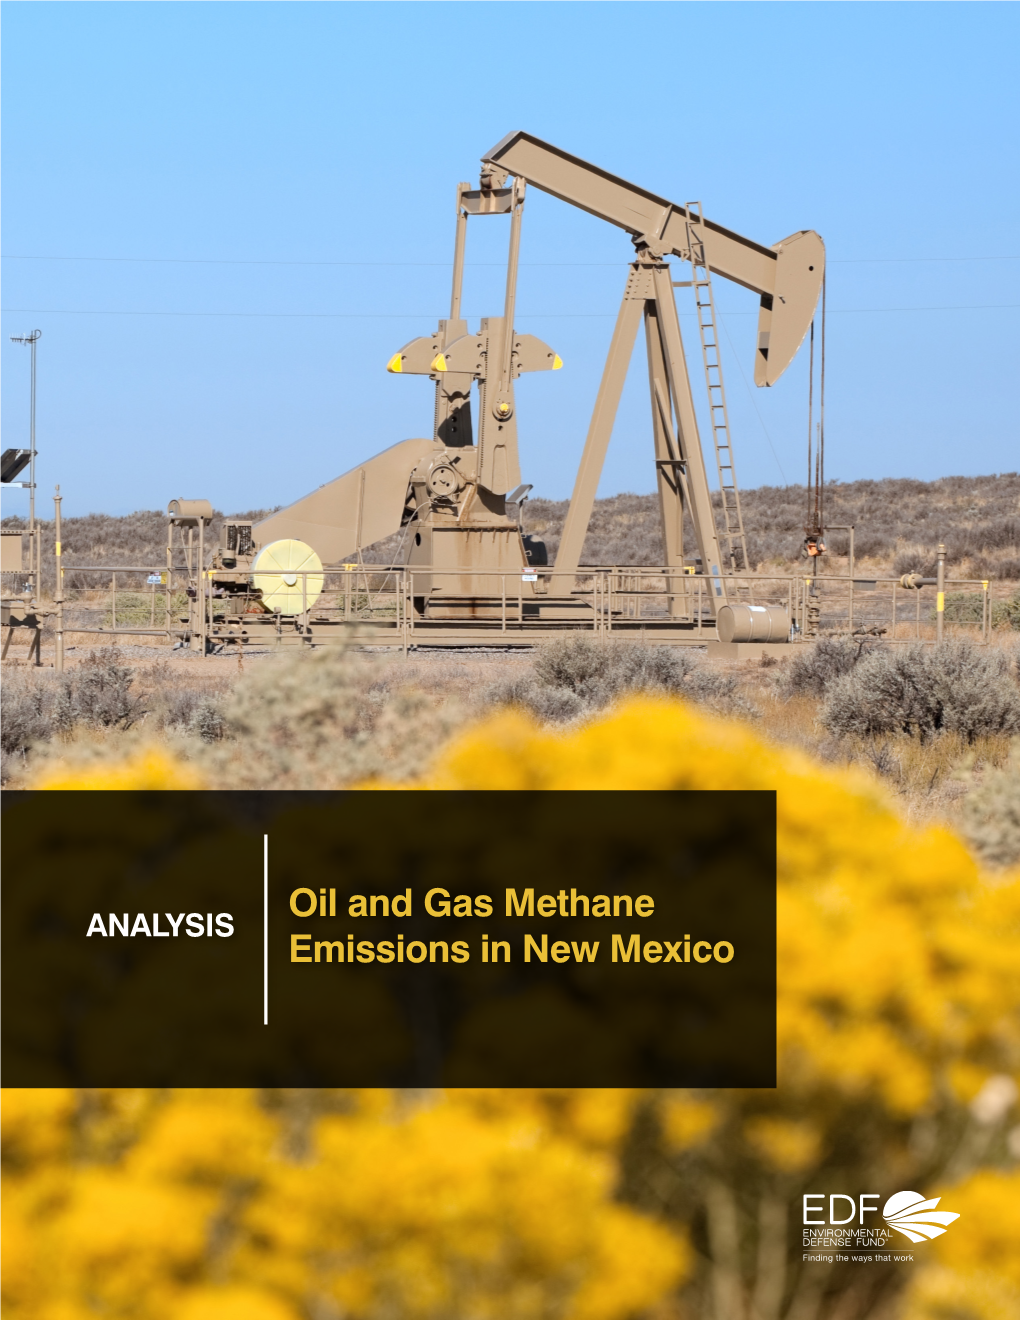 Oil and Gas Methane Emissions in New Mexico